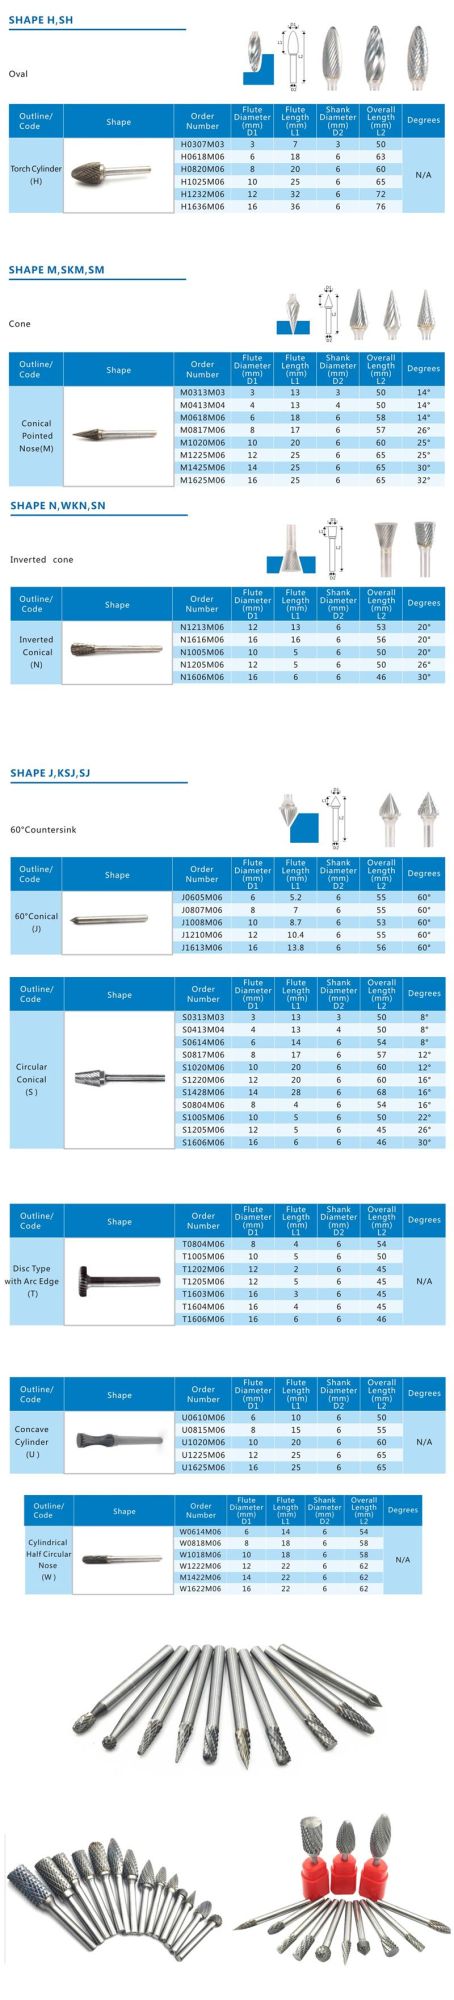 Type a Cylindrical Tungsten Carbide Rotary Files